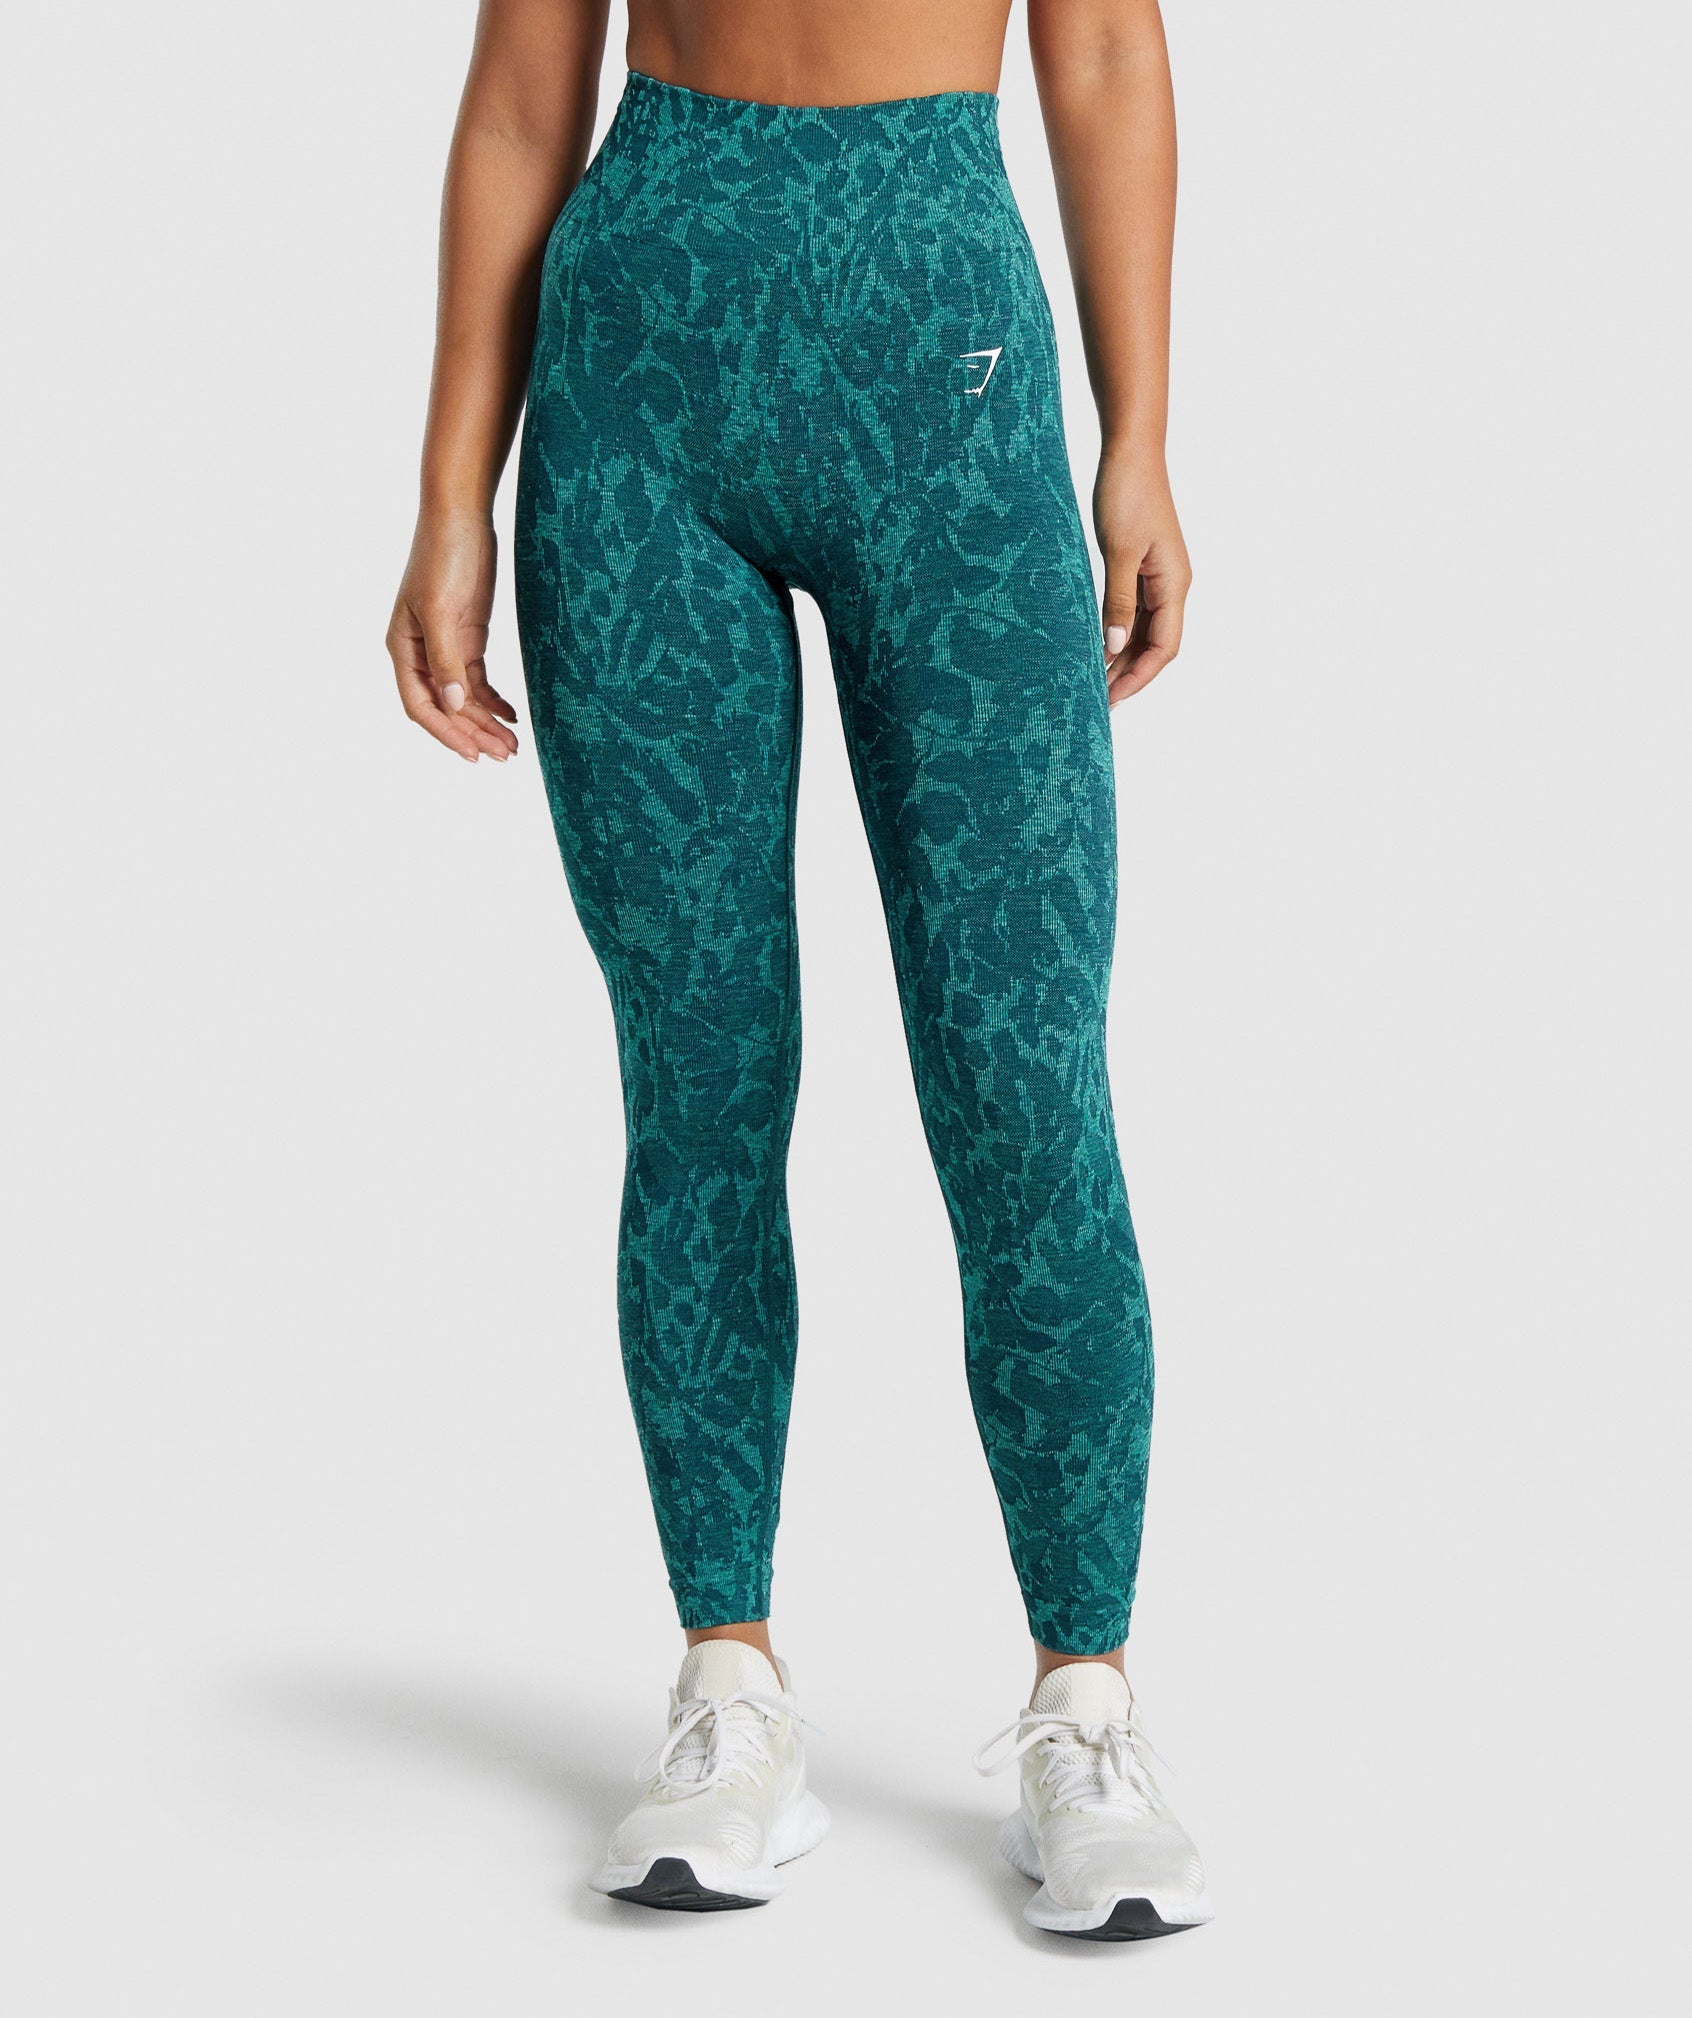 Adapt Animal Seamless Leggings in Butterfly | Teal - view 1